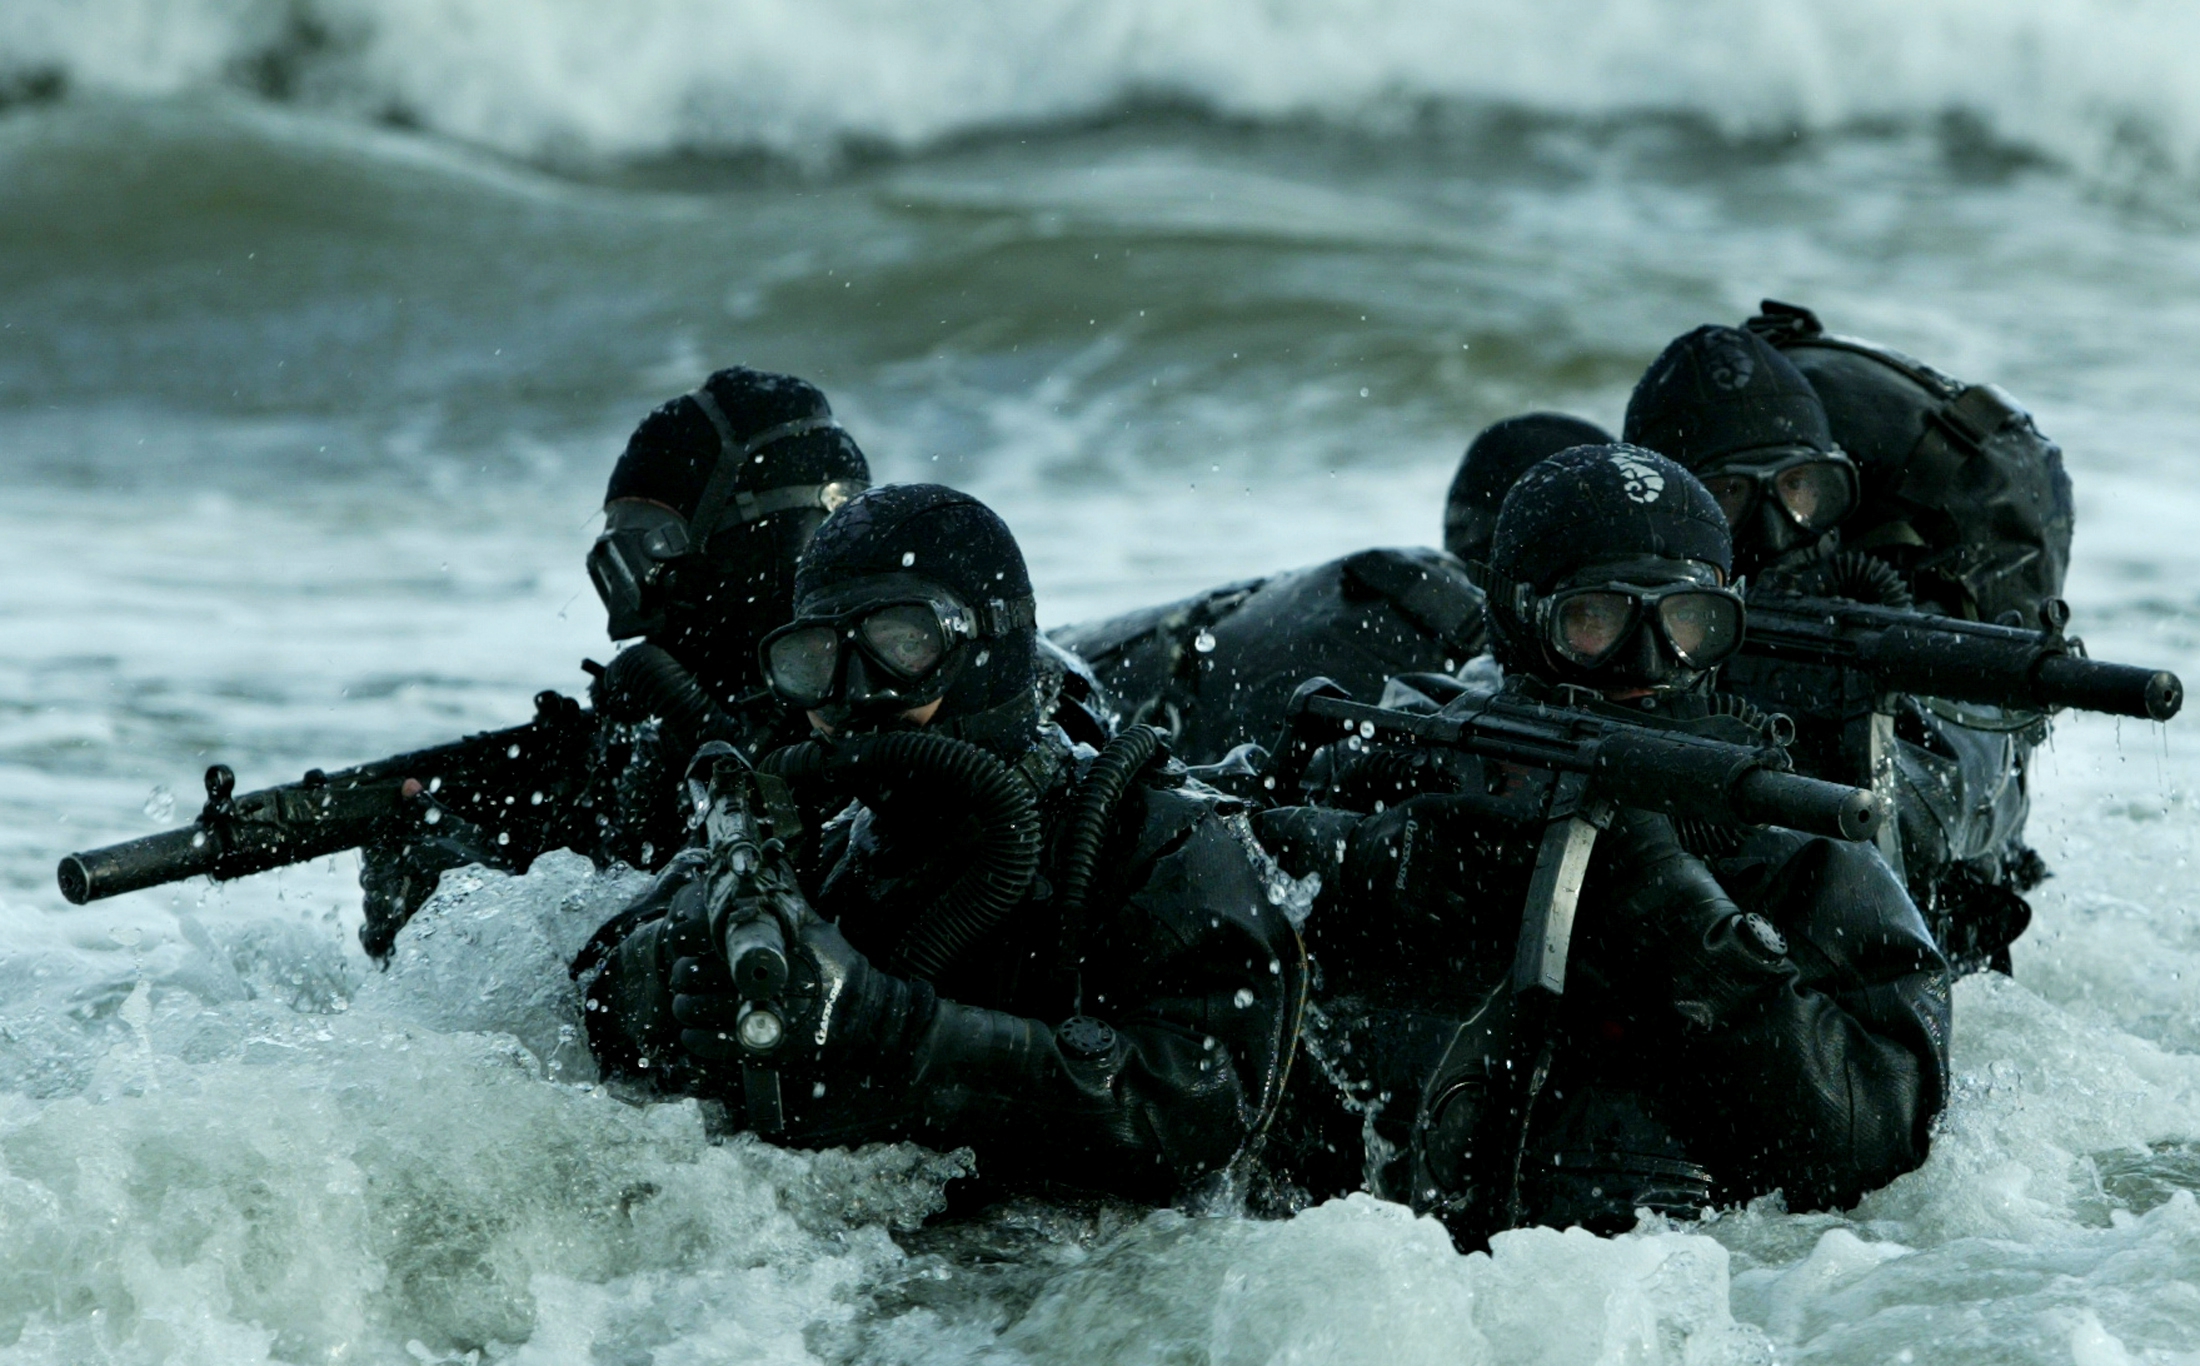 soldiers army military navy navy seals 2200x1366 wallpaper